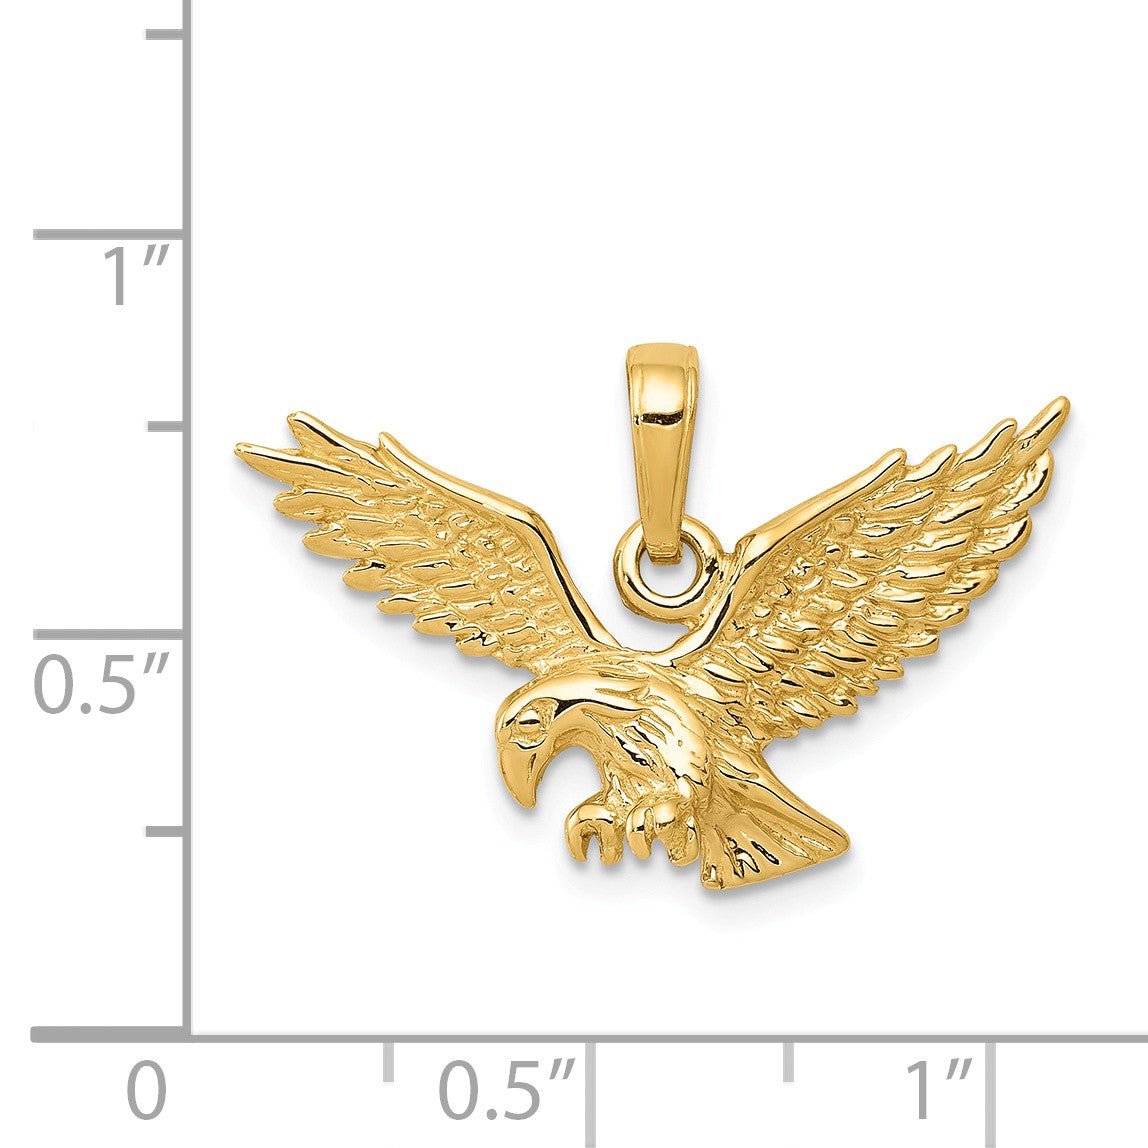 Alternate view of the 14k Yellow Gold Polished Eagle Pendant, 25mm by The Black Bow Jewelry Co.